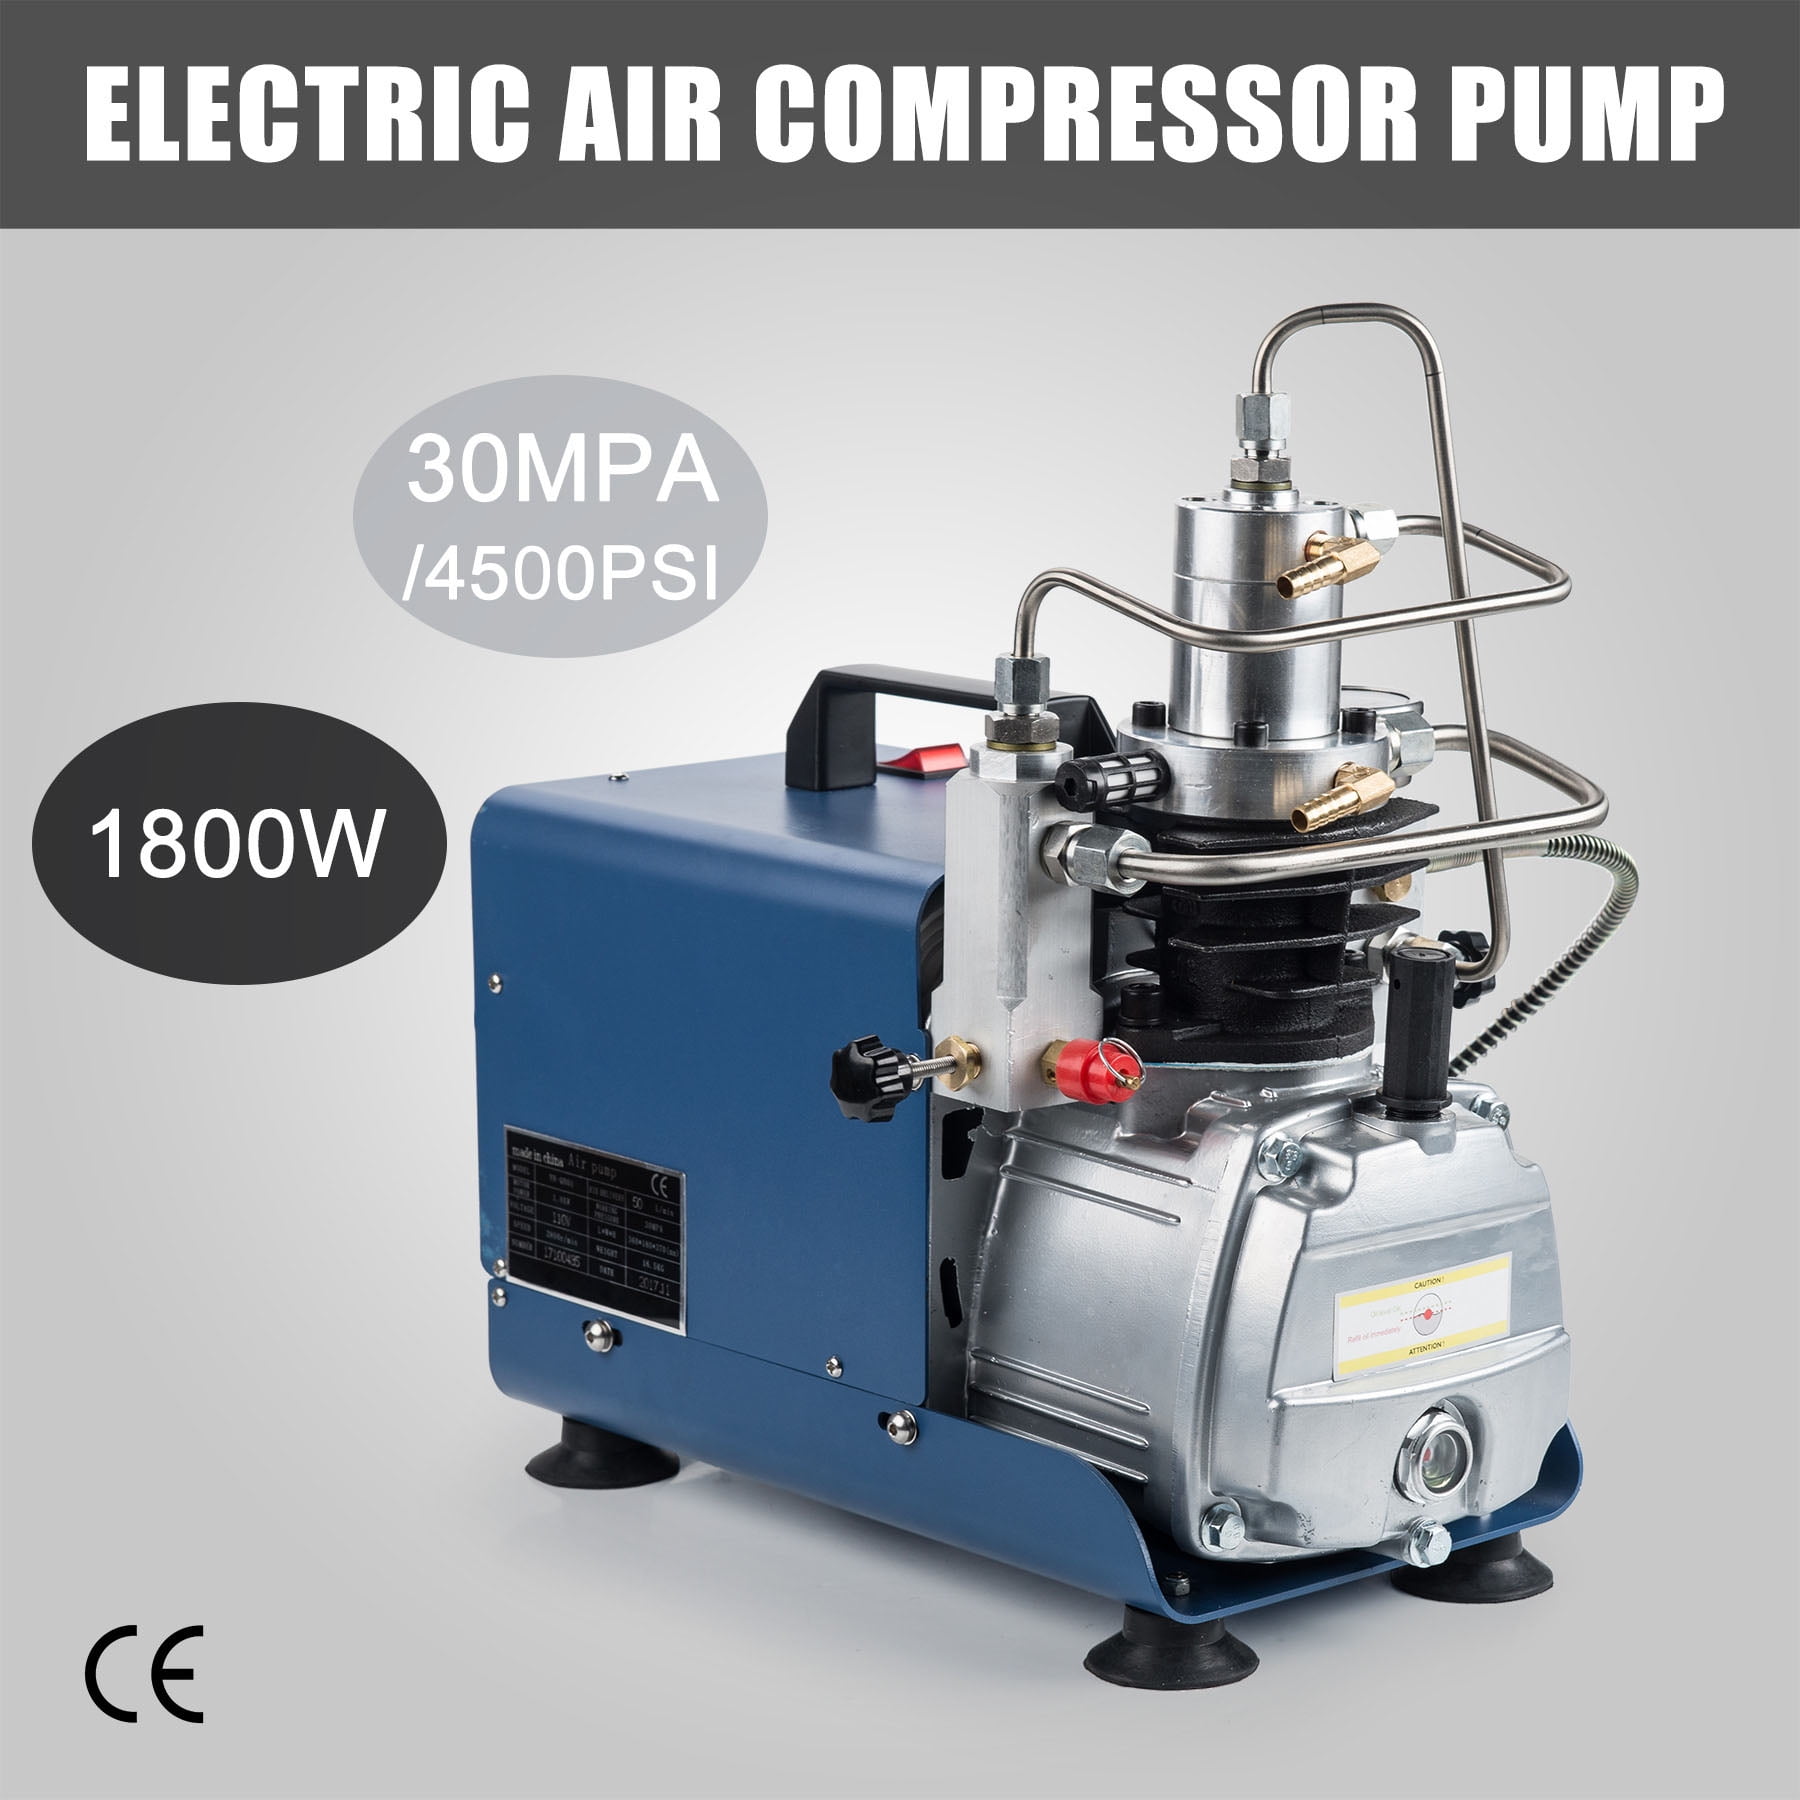 Blue Filter Separator Pump High Pressure For YONG HENG 30MPa Air Compressor PCP 